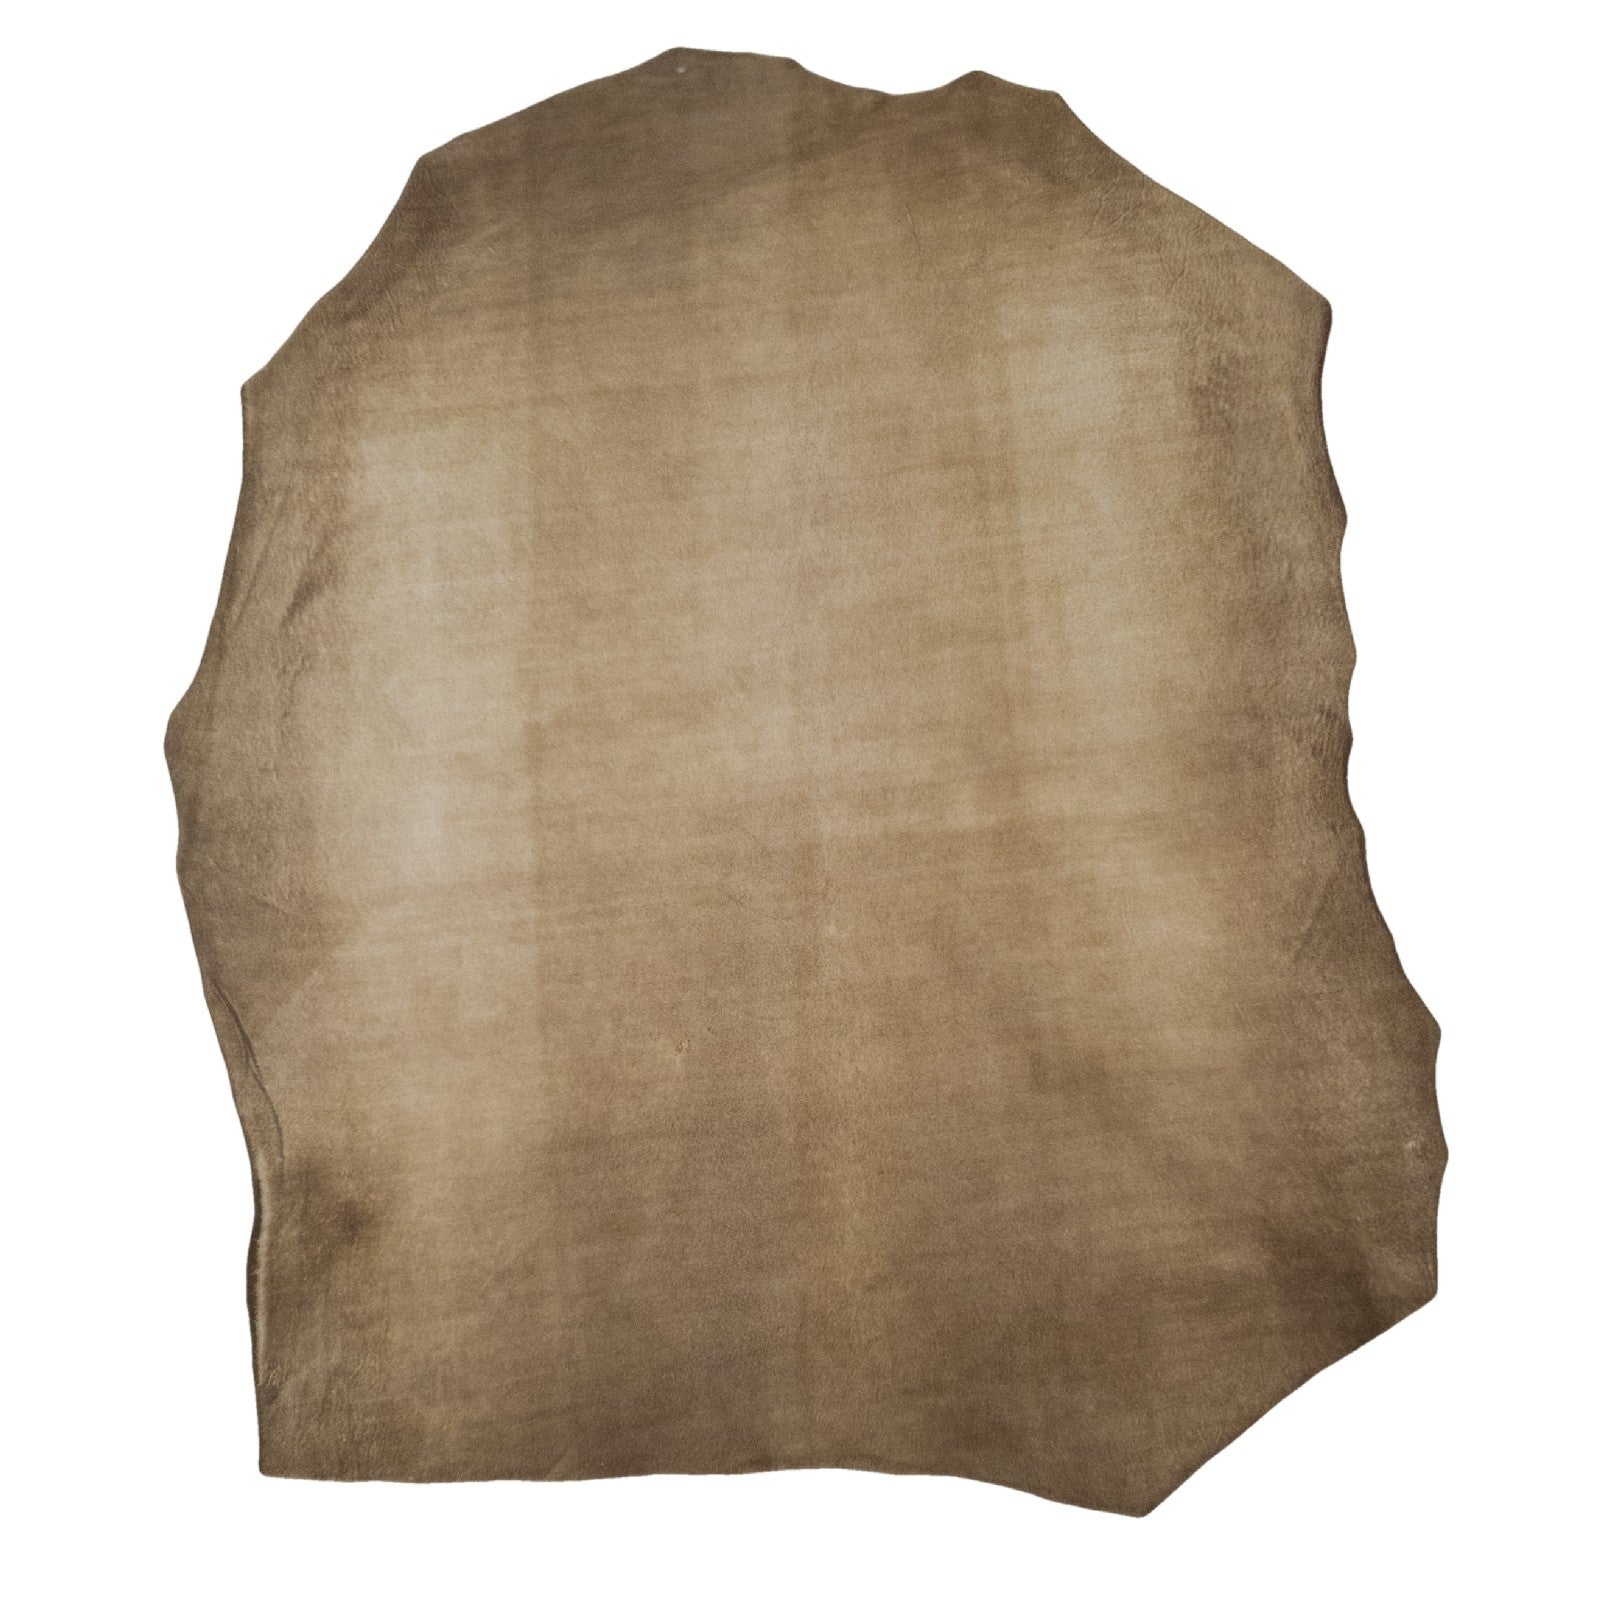 Denim Dyed, 4-7 Sq Ft, Lamb Hides, Brown | The Leather Guy